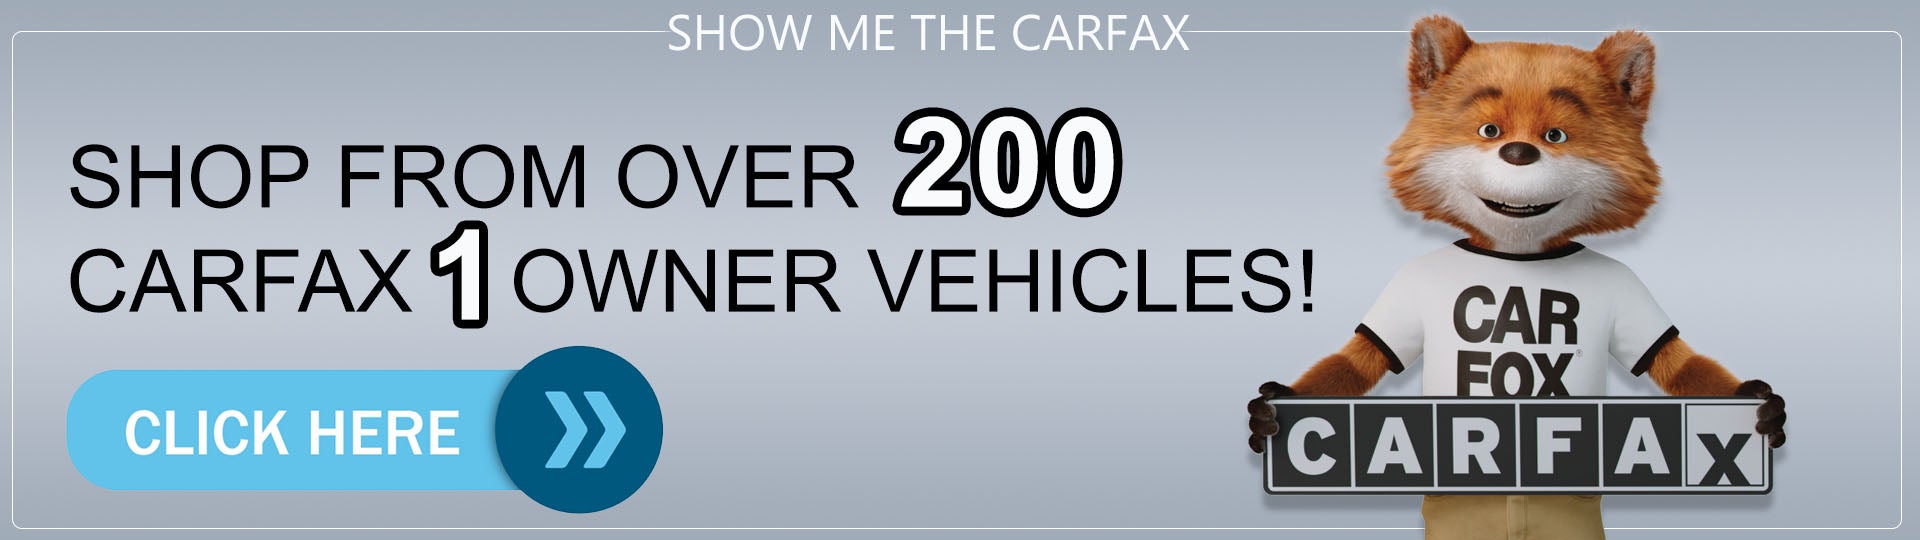 1 owner vehicle carfax 